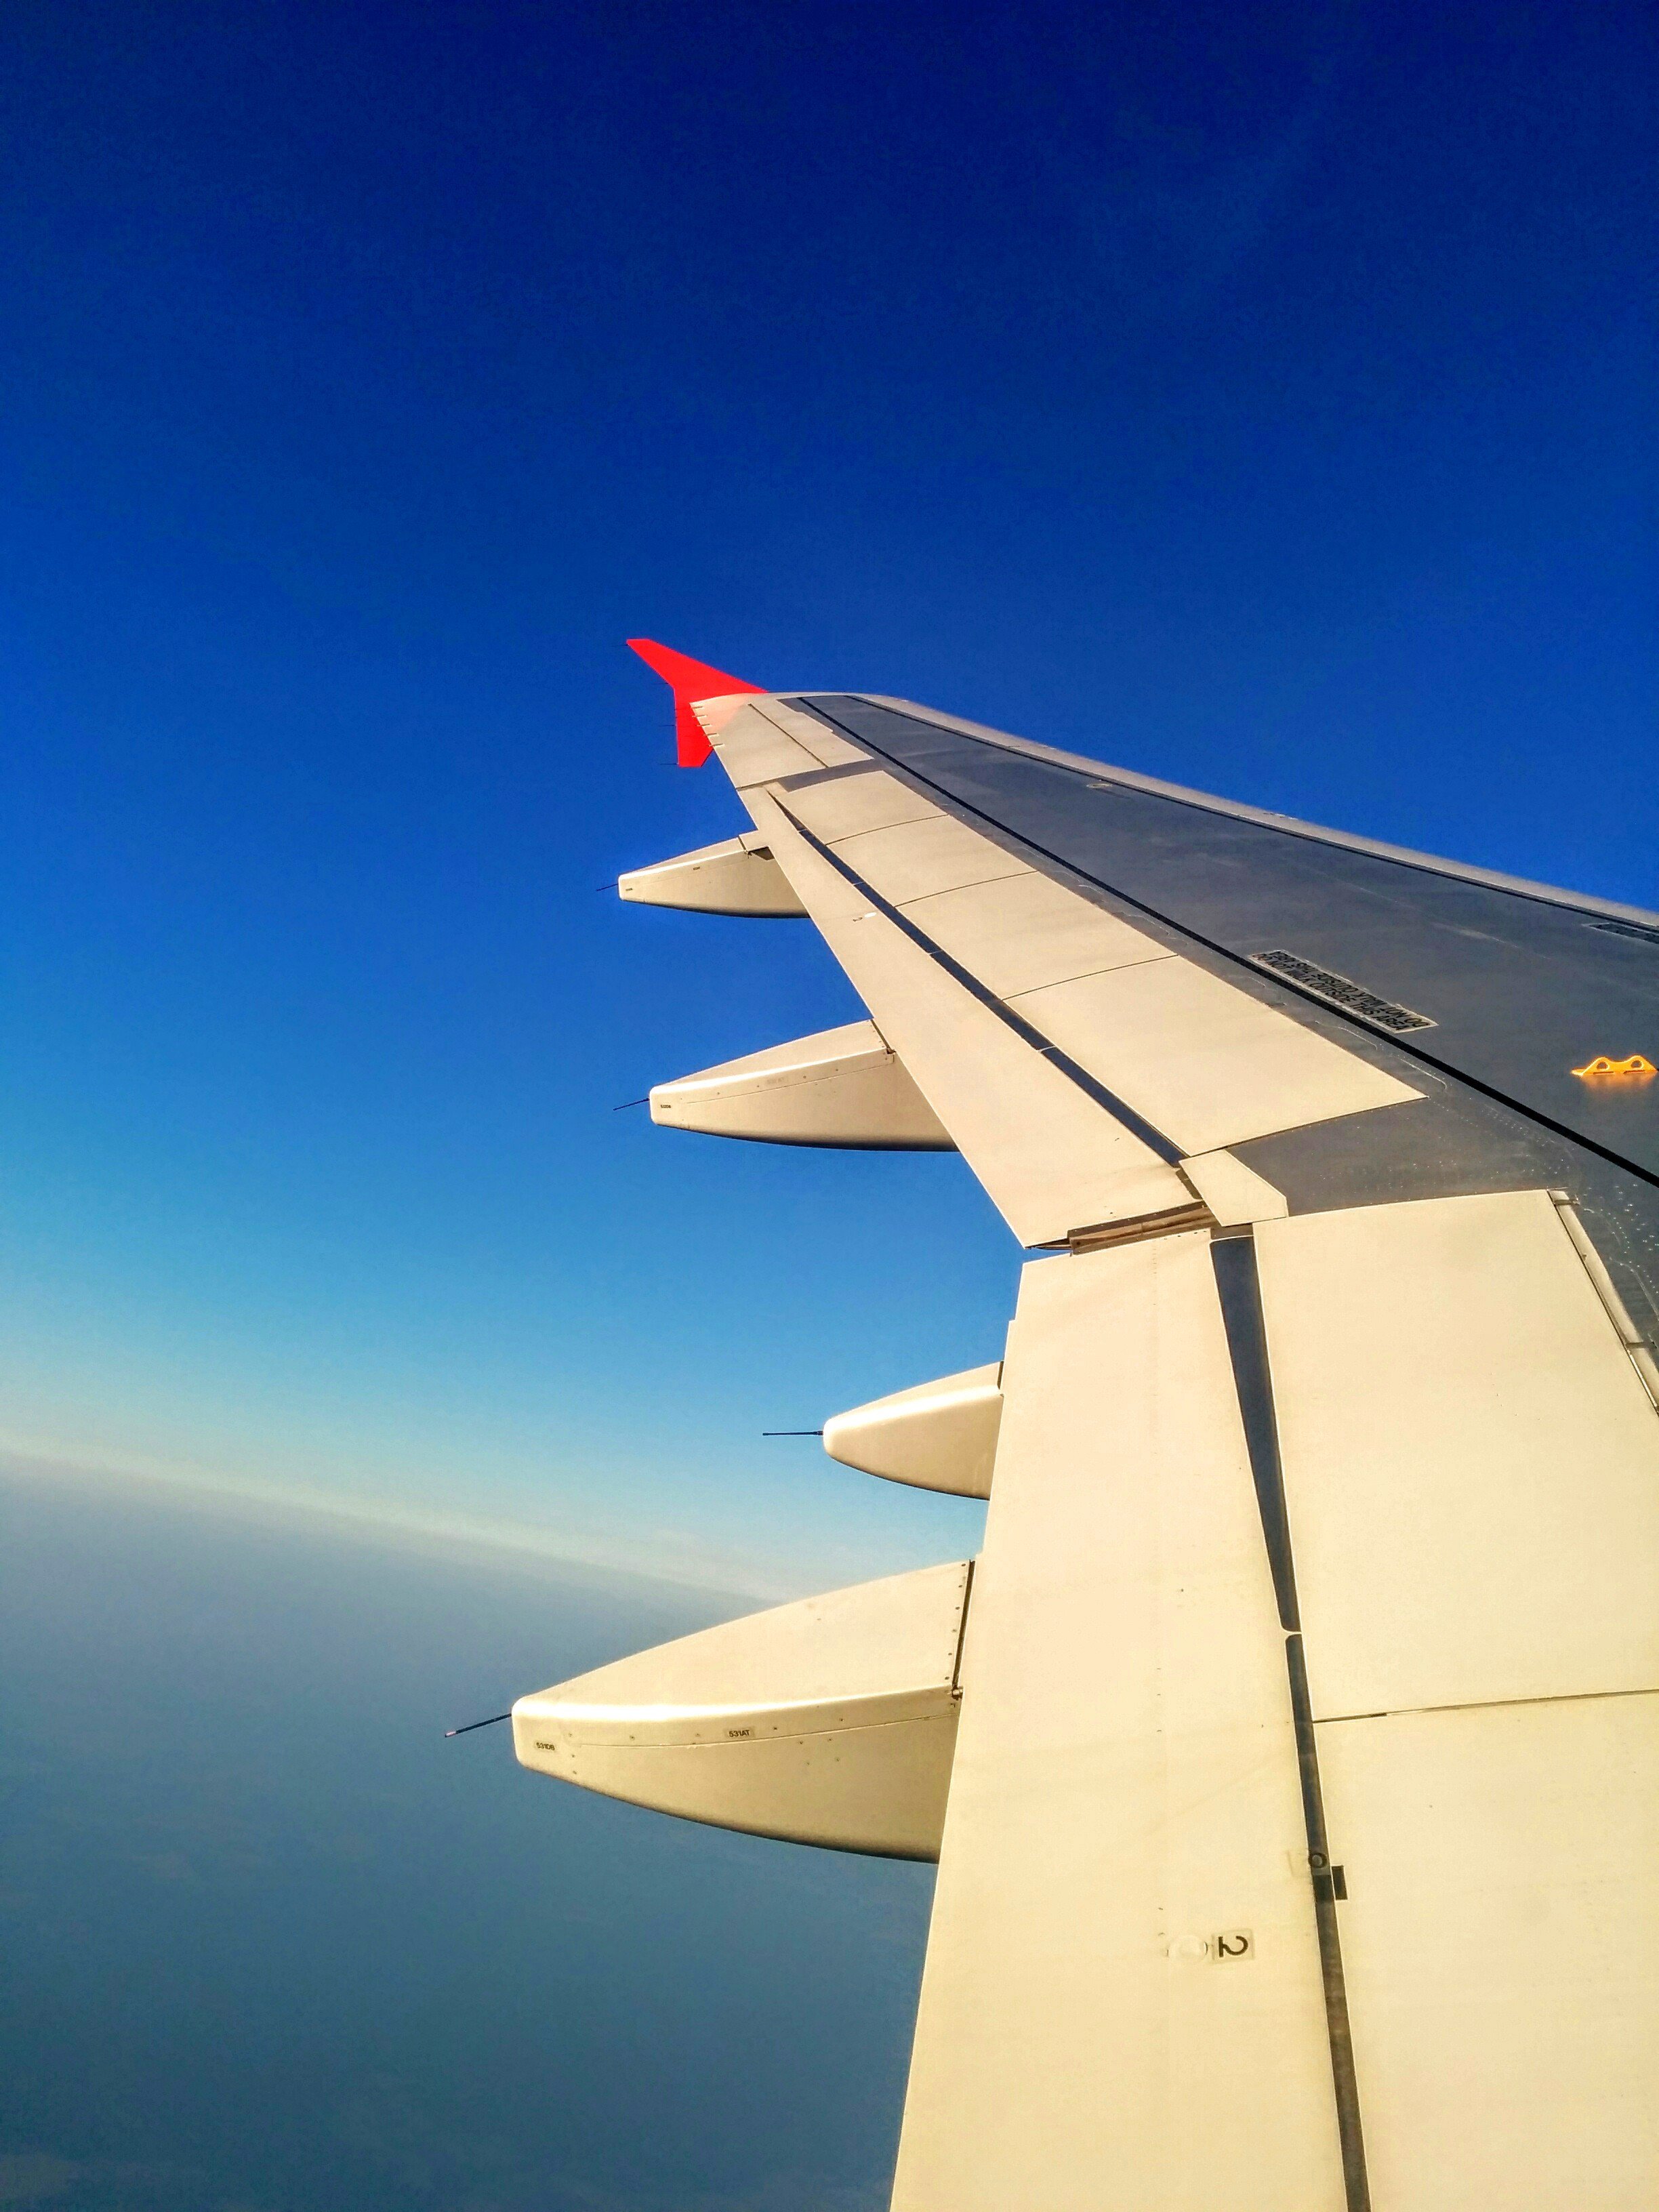 Free Airplane Window Image & Background. Royalty Free Picture